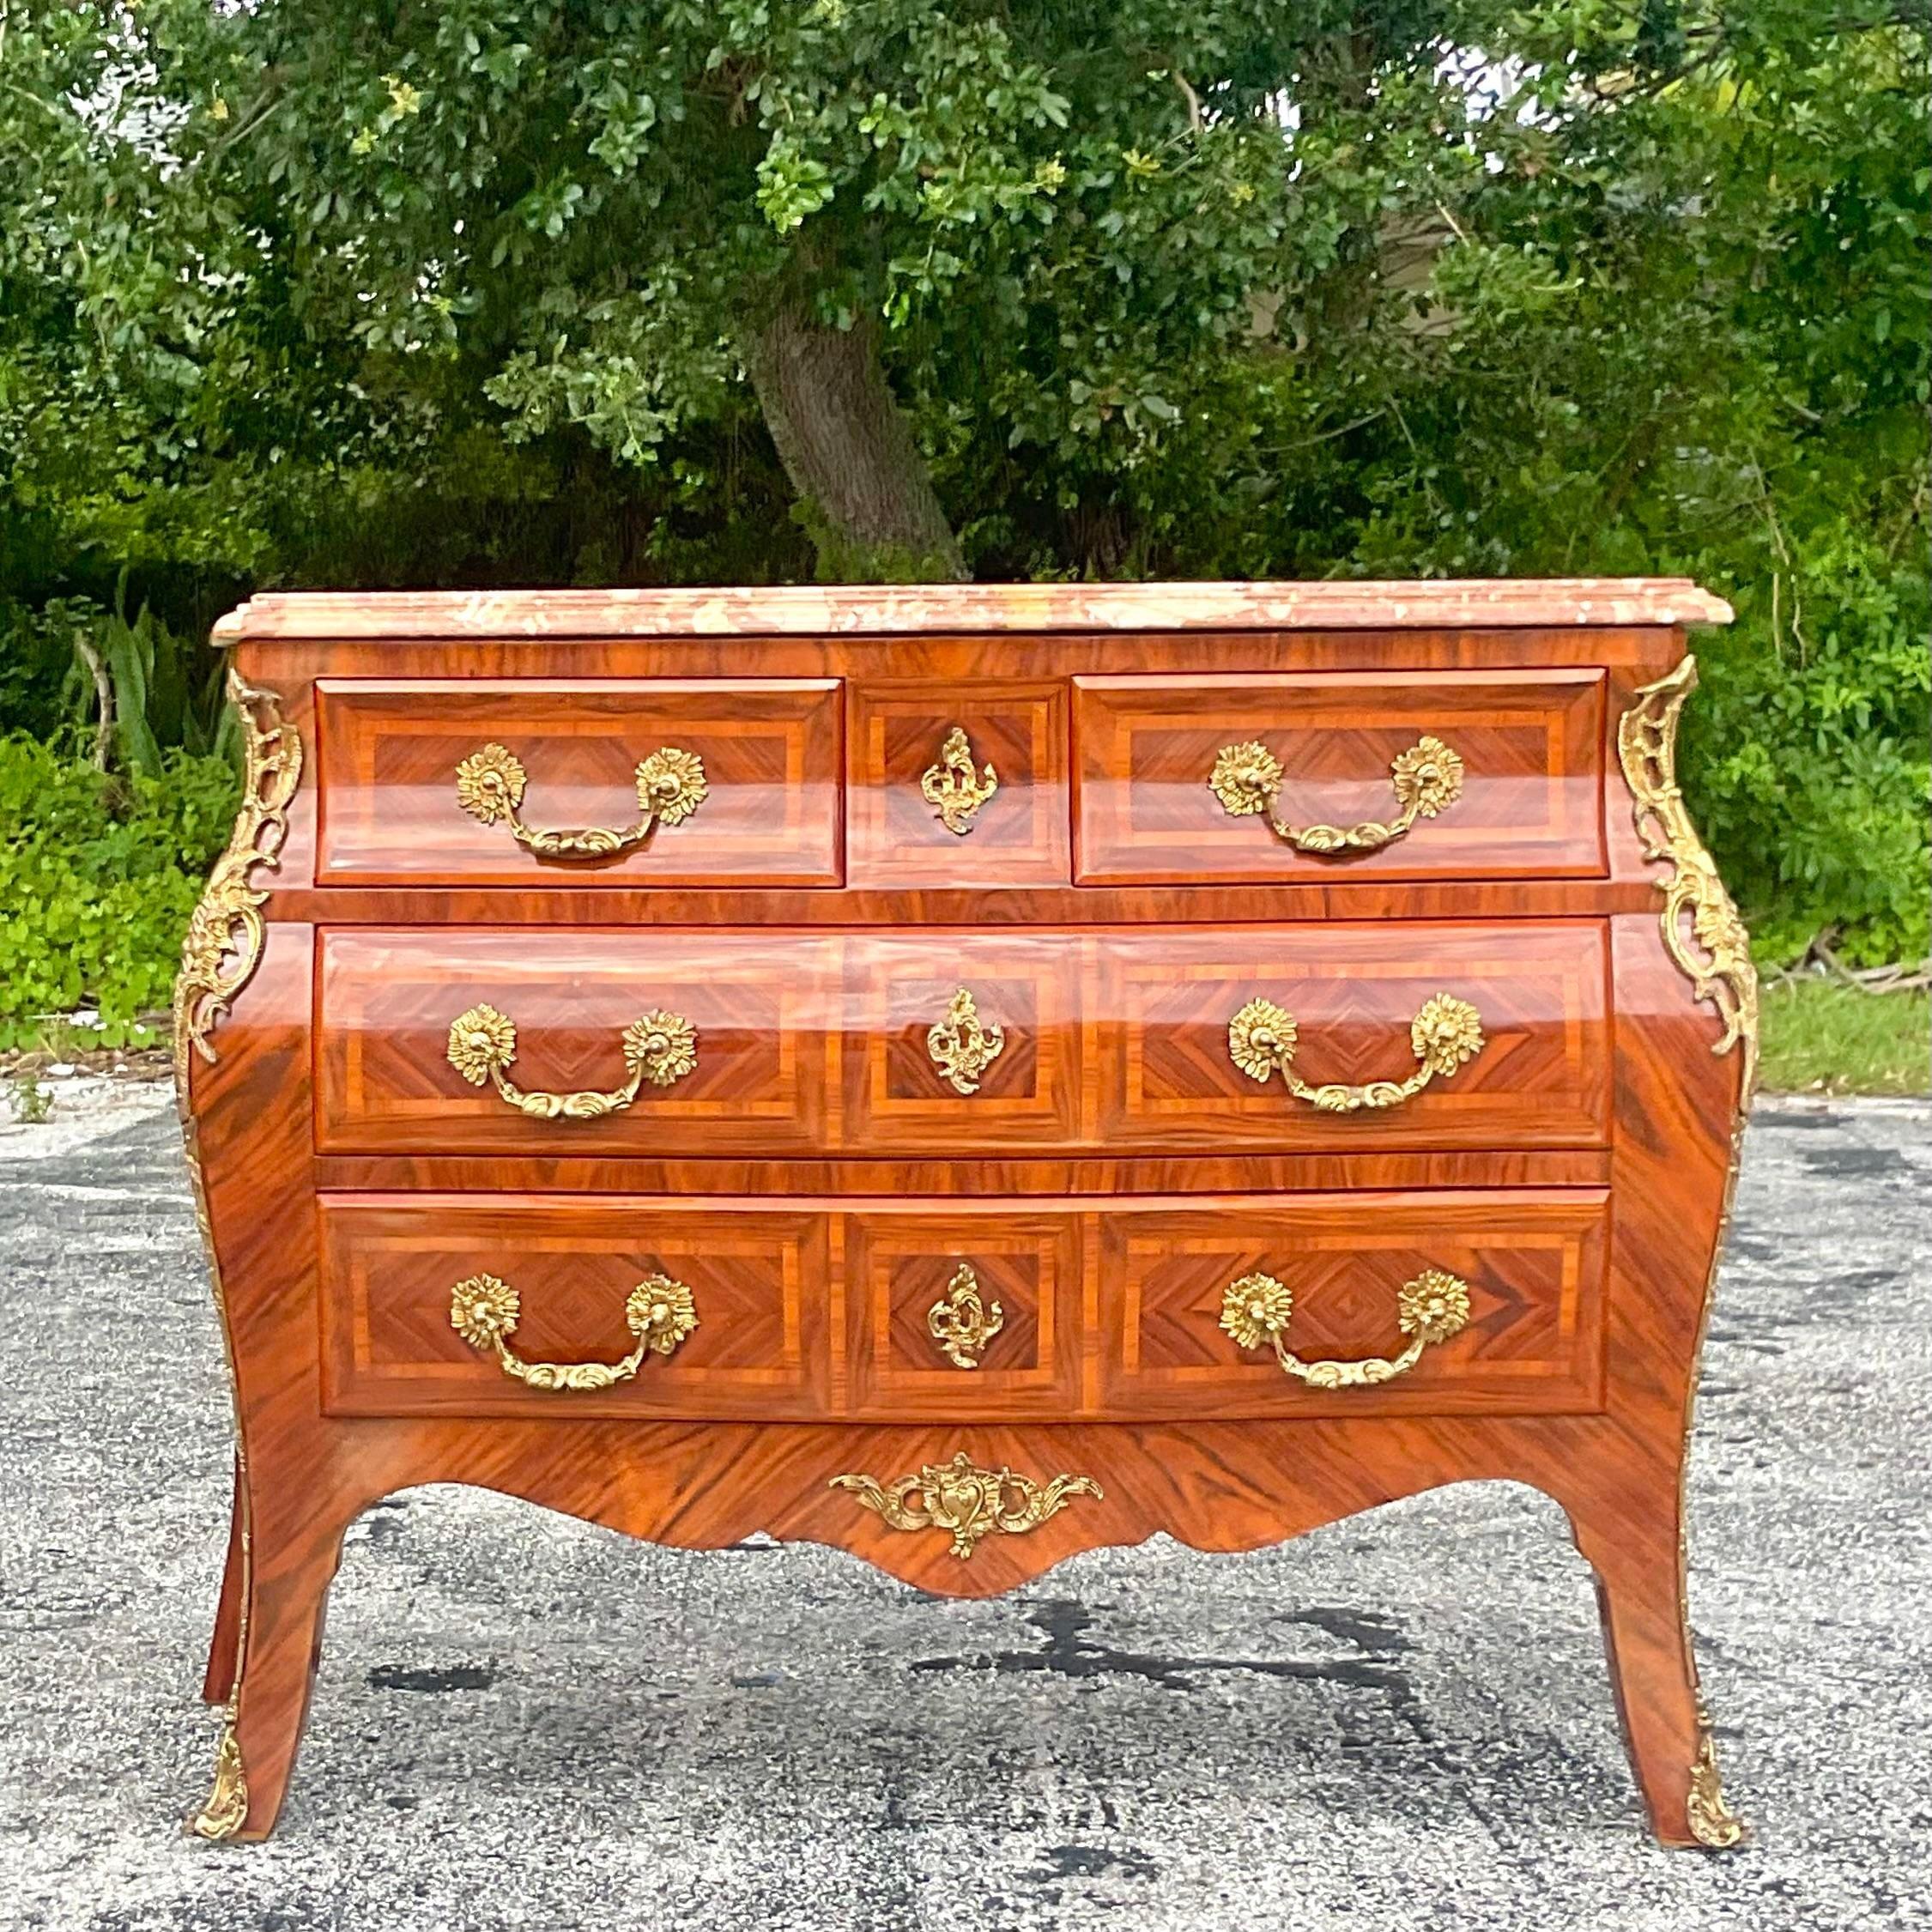 A fabulous vintage Regency Bombe chest. Beautiful Marquetry detail with gorgeous brass Ormolu details. Stunning stone top with a beveled bull nose edge. Acquired from a Palm Beach estate.